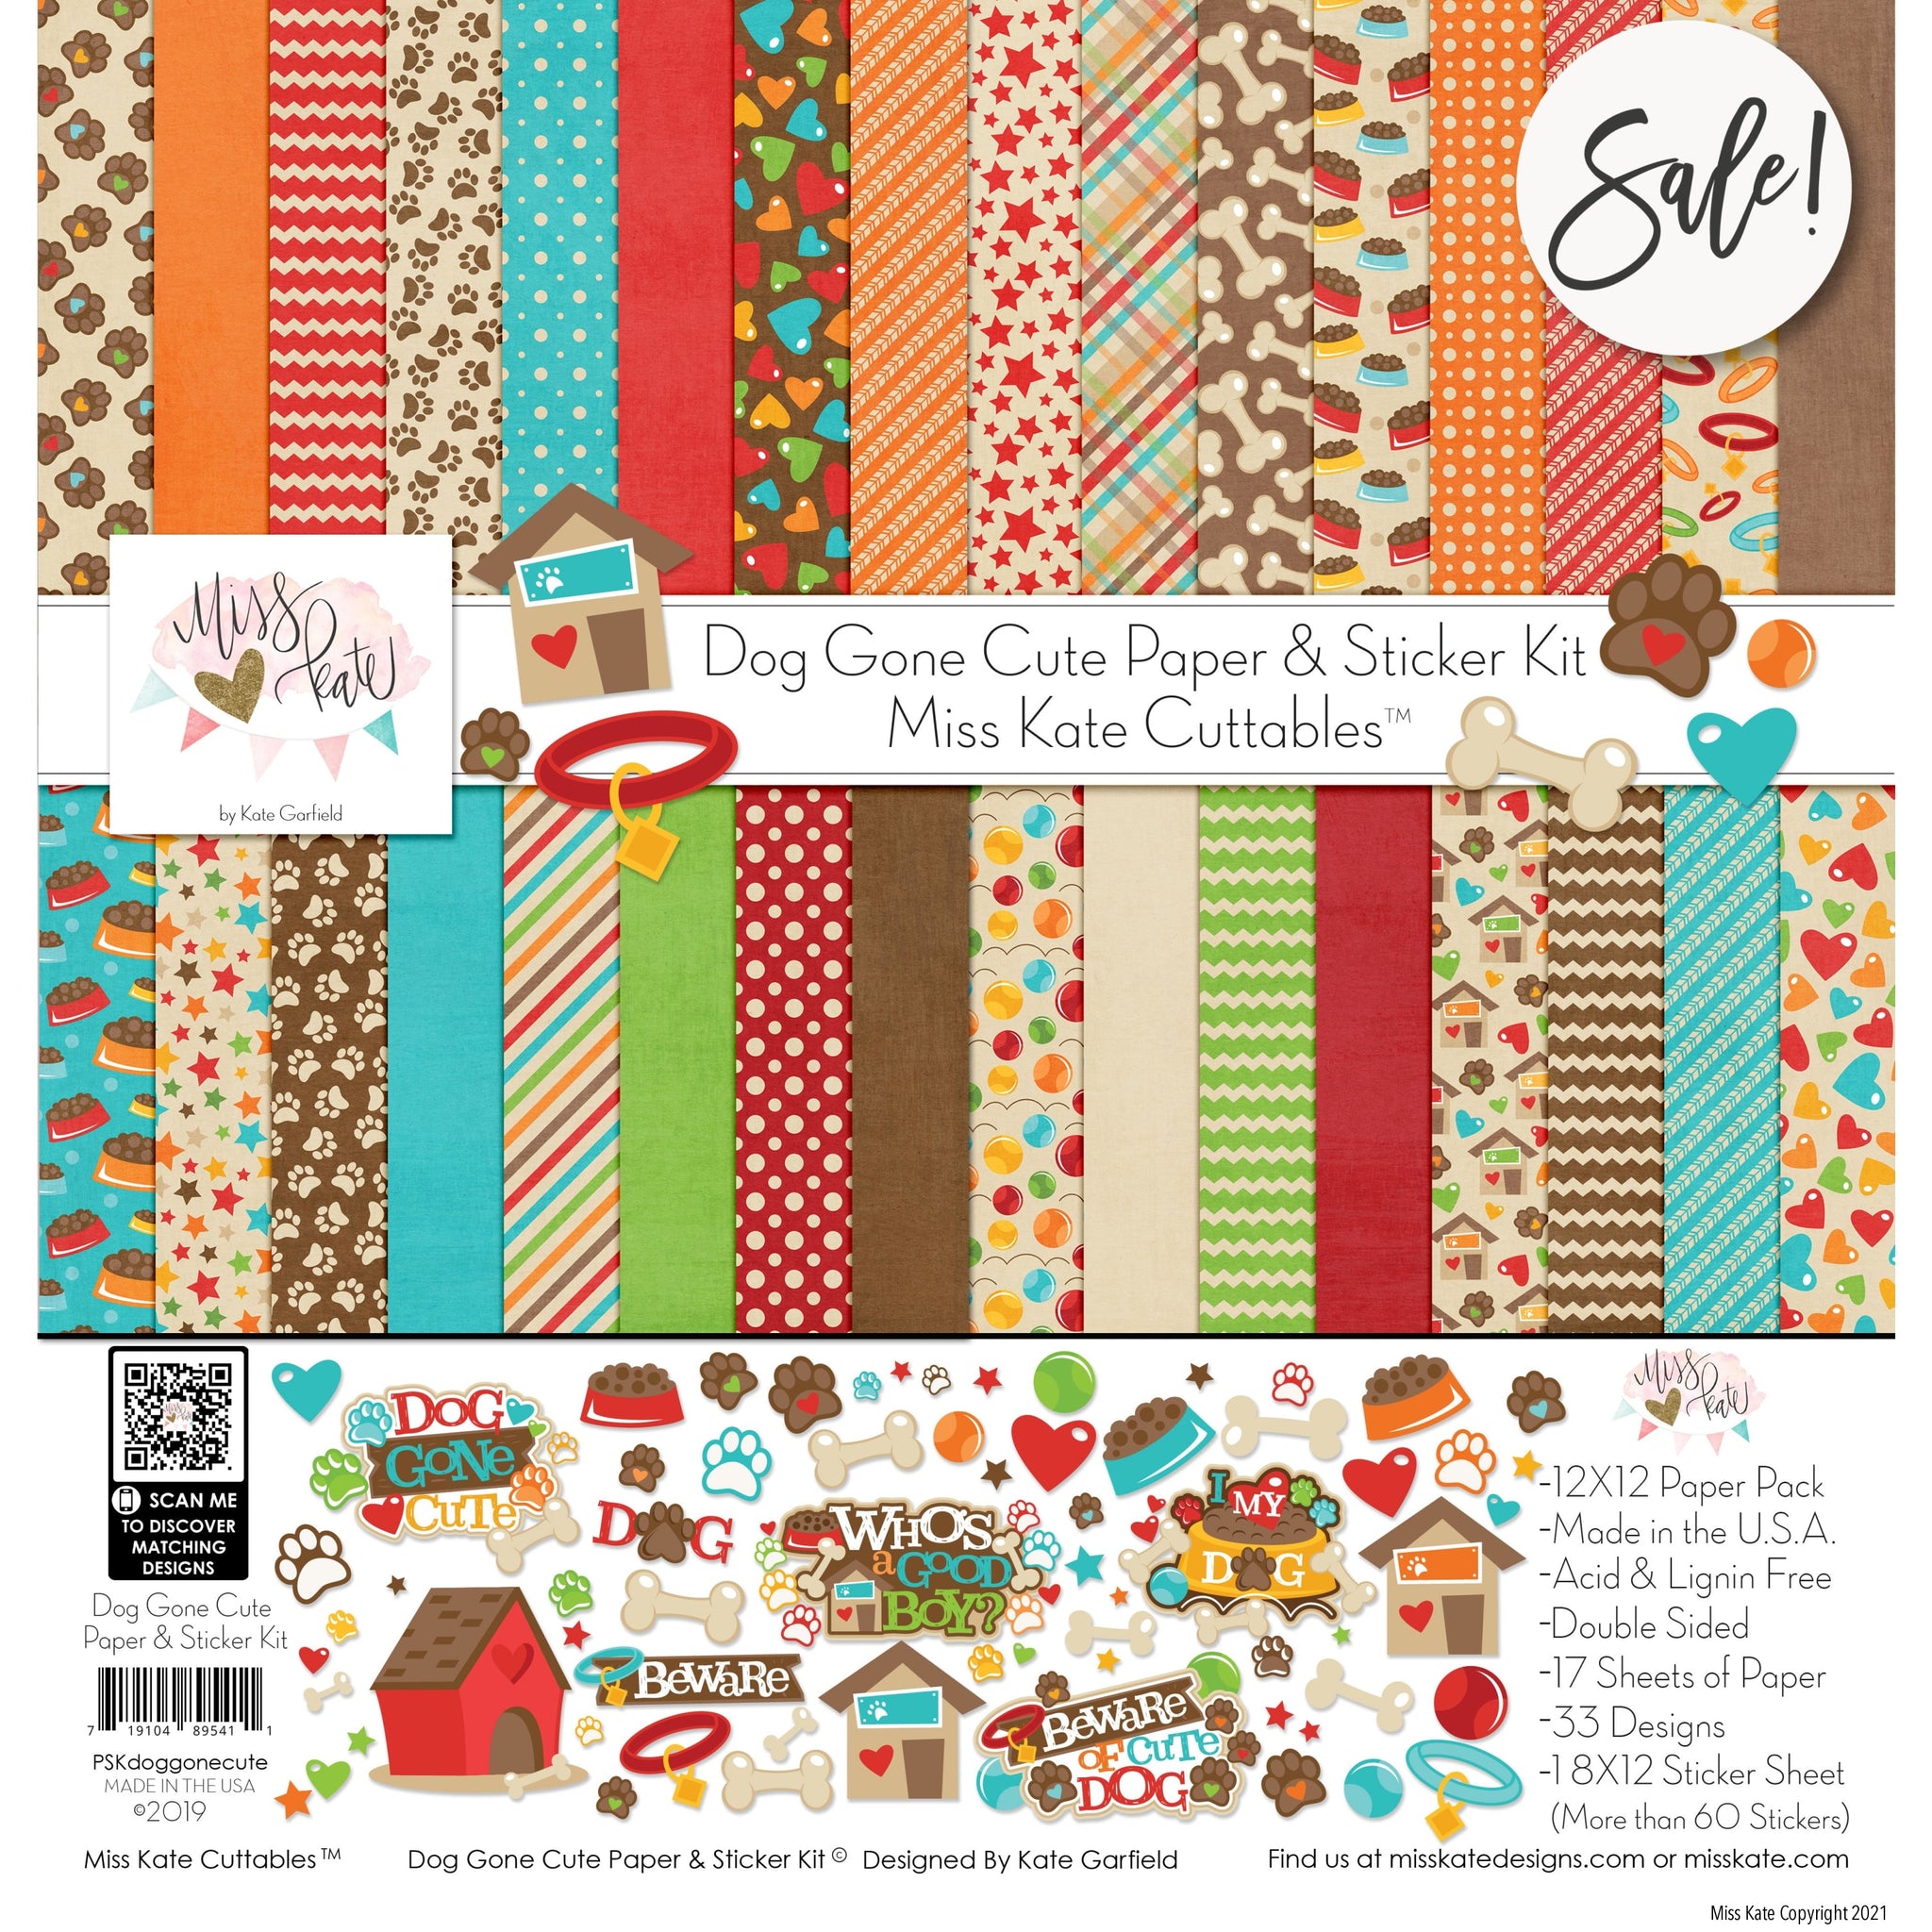 Sew Dog Gone Cute: Scrapbooking: Plans for the Future